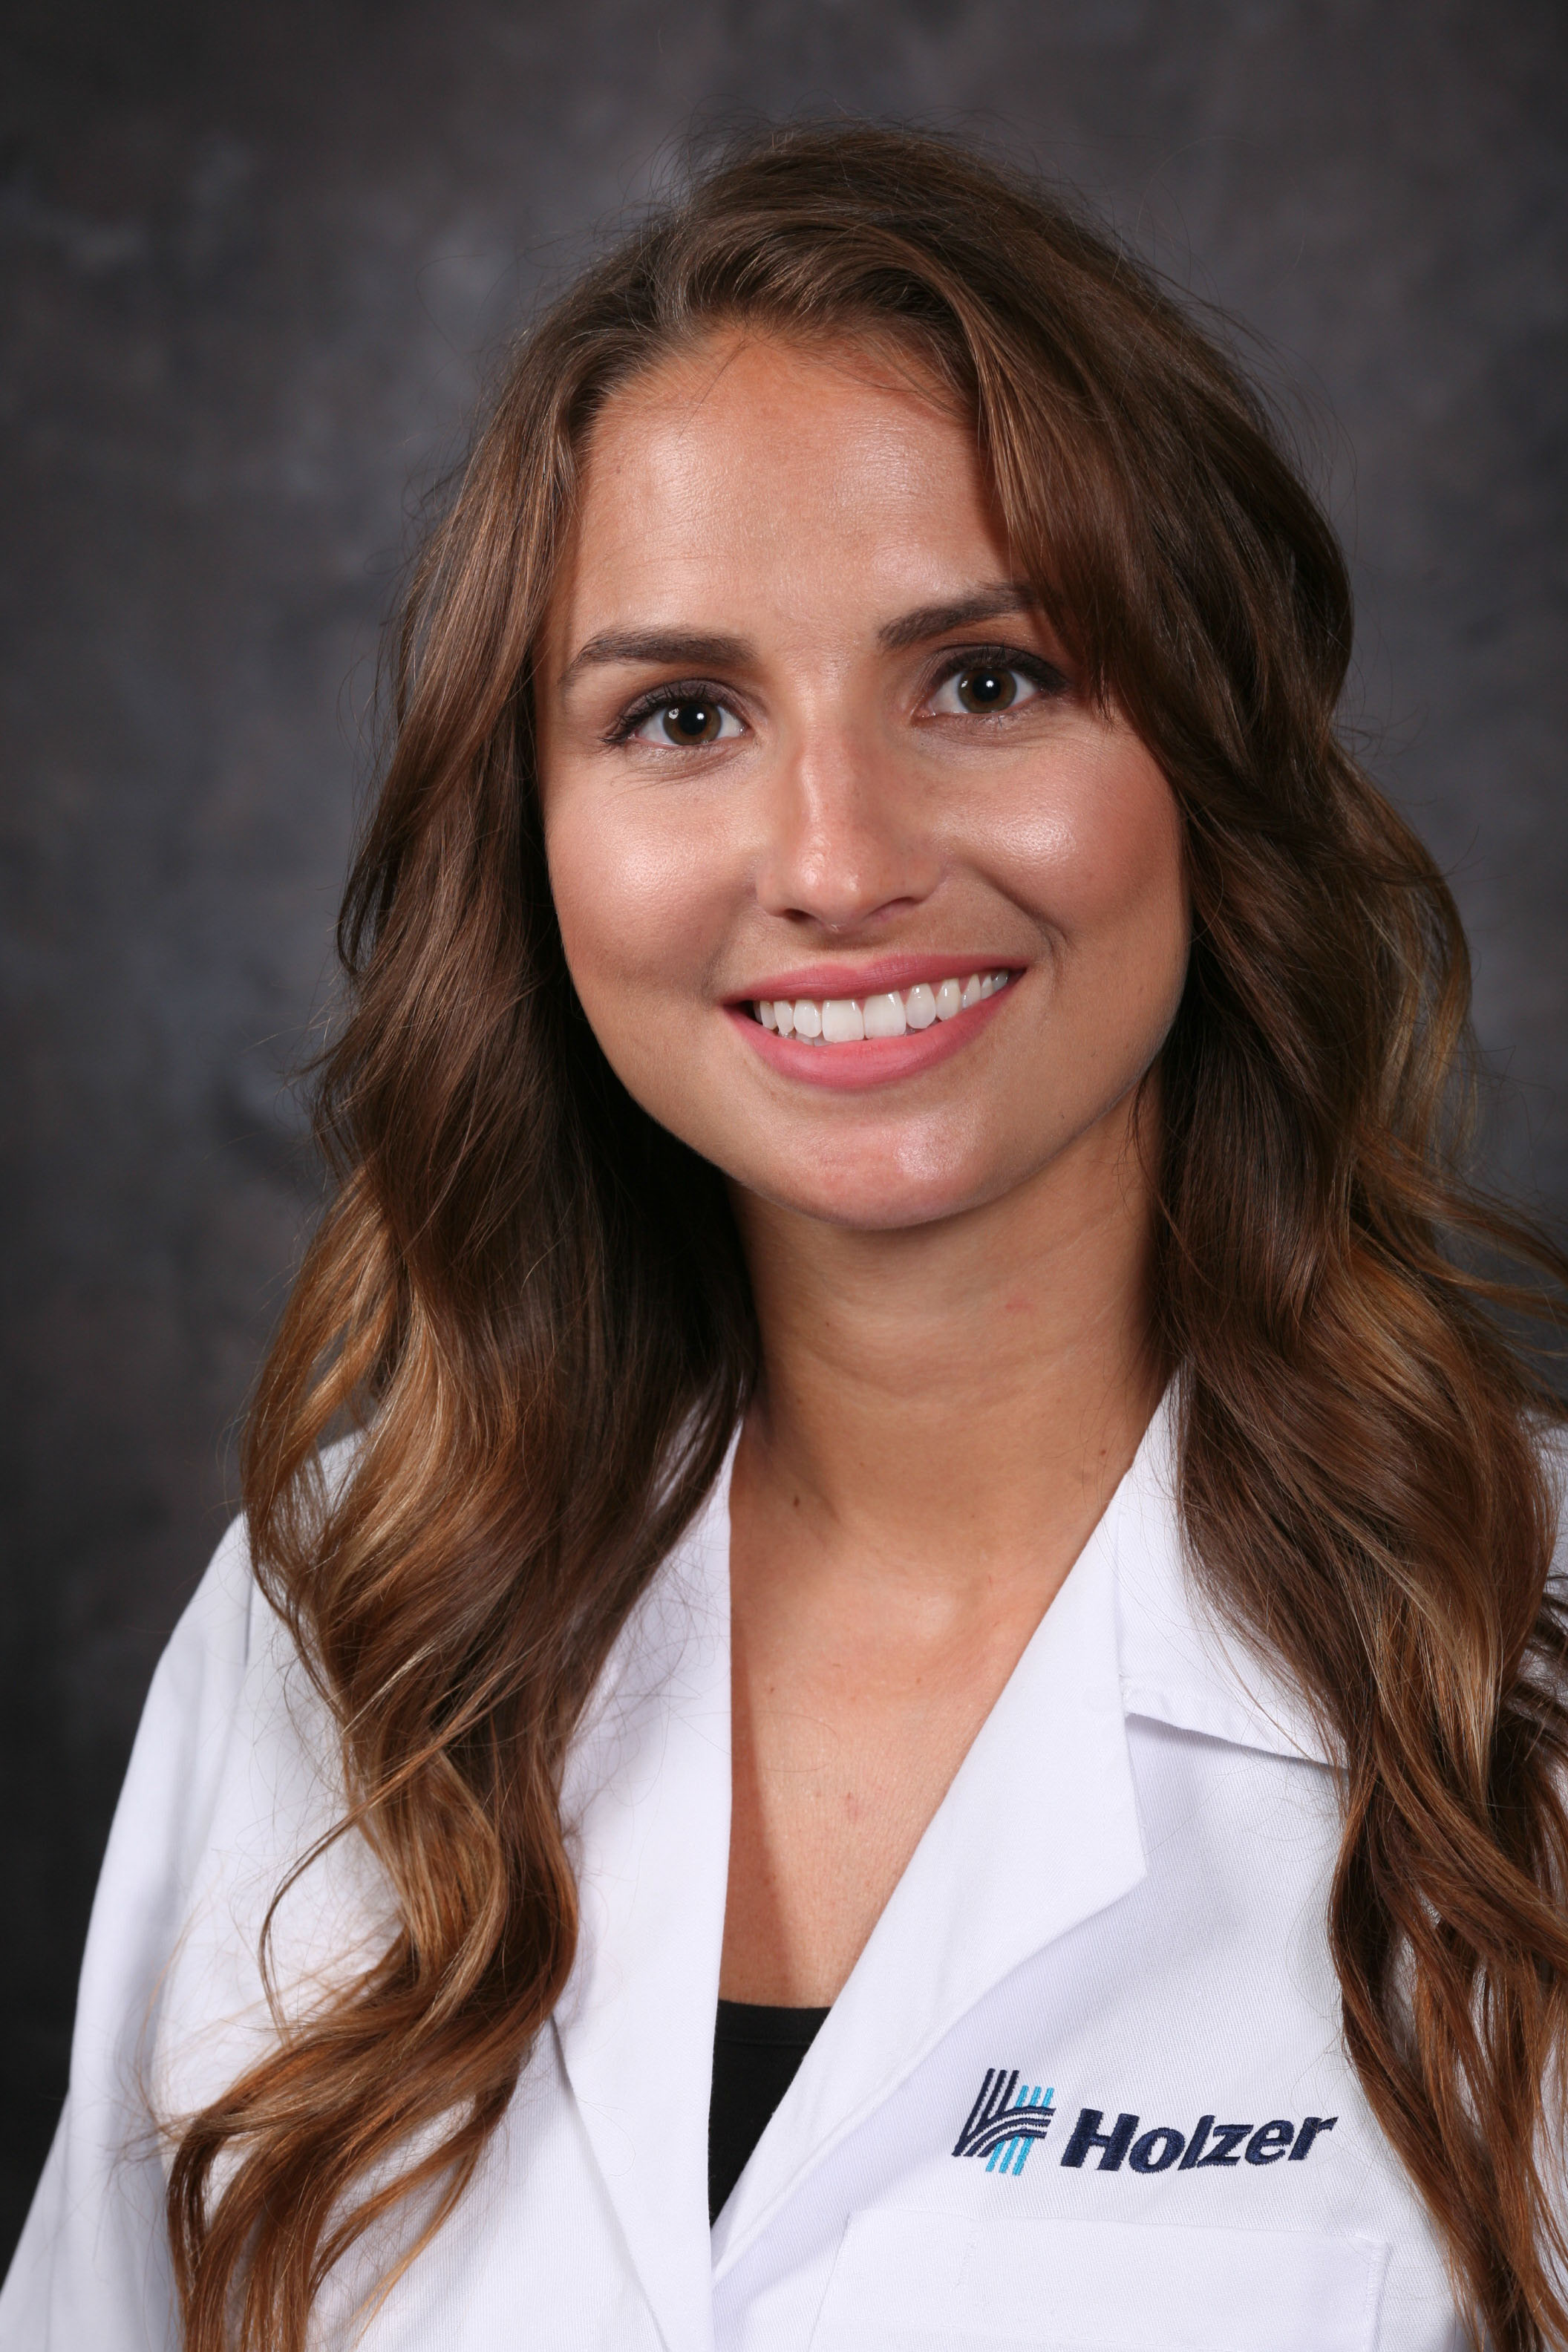 Holzer is proud to announce Jessica James, DO, Pediatrics, has joined our team of highly skilled professionals at Holzer. - James